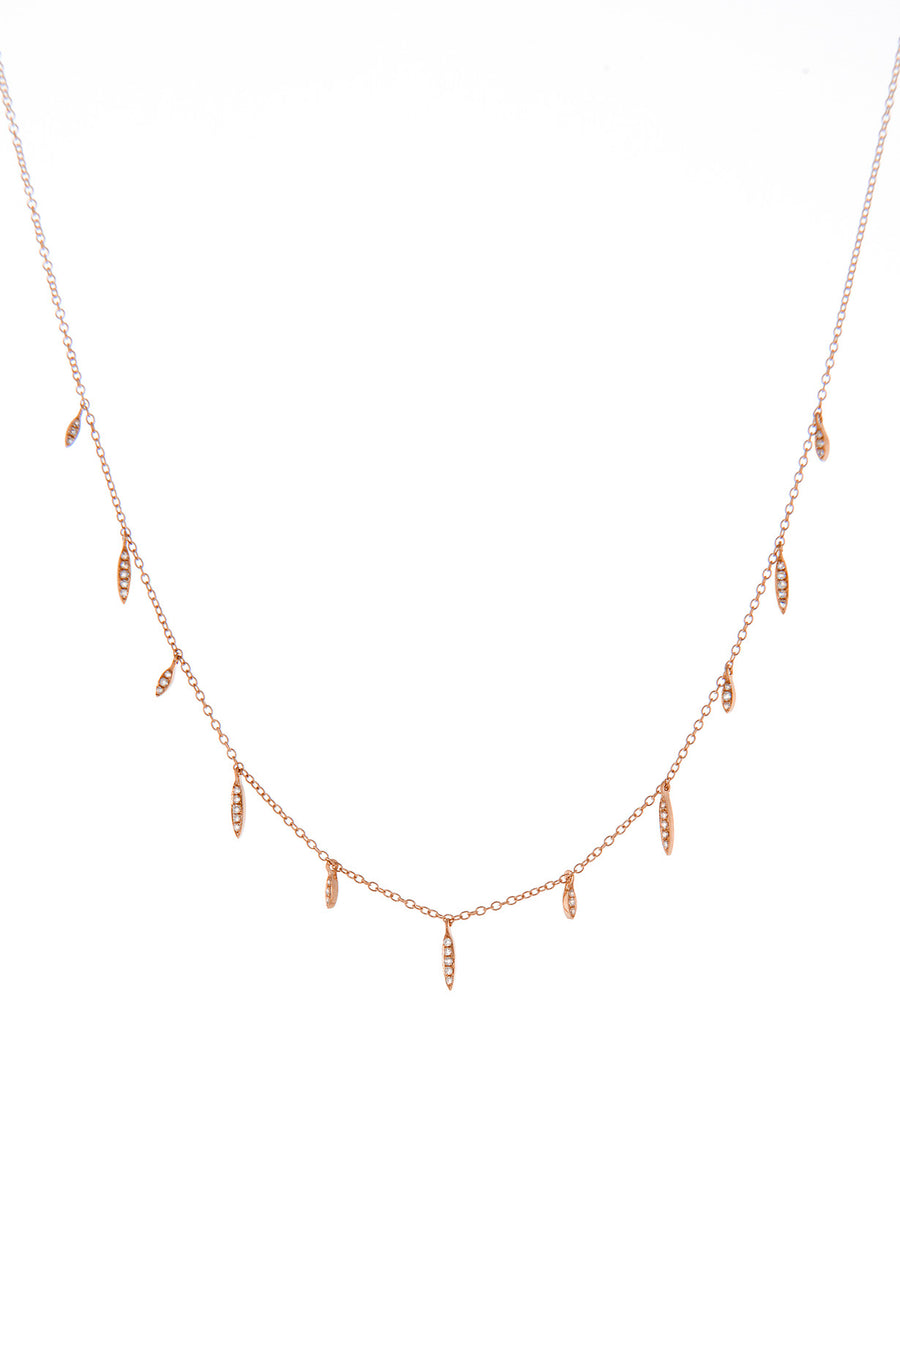 Eleven Wishes Diamond Necklace in 14K Yellow Gold